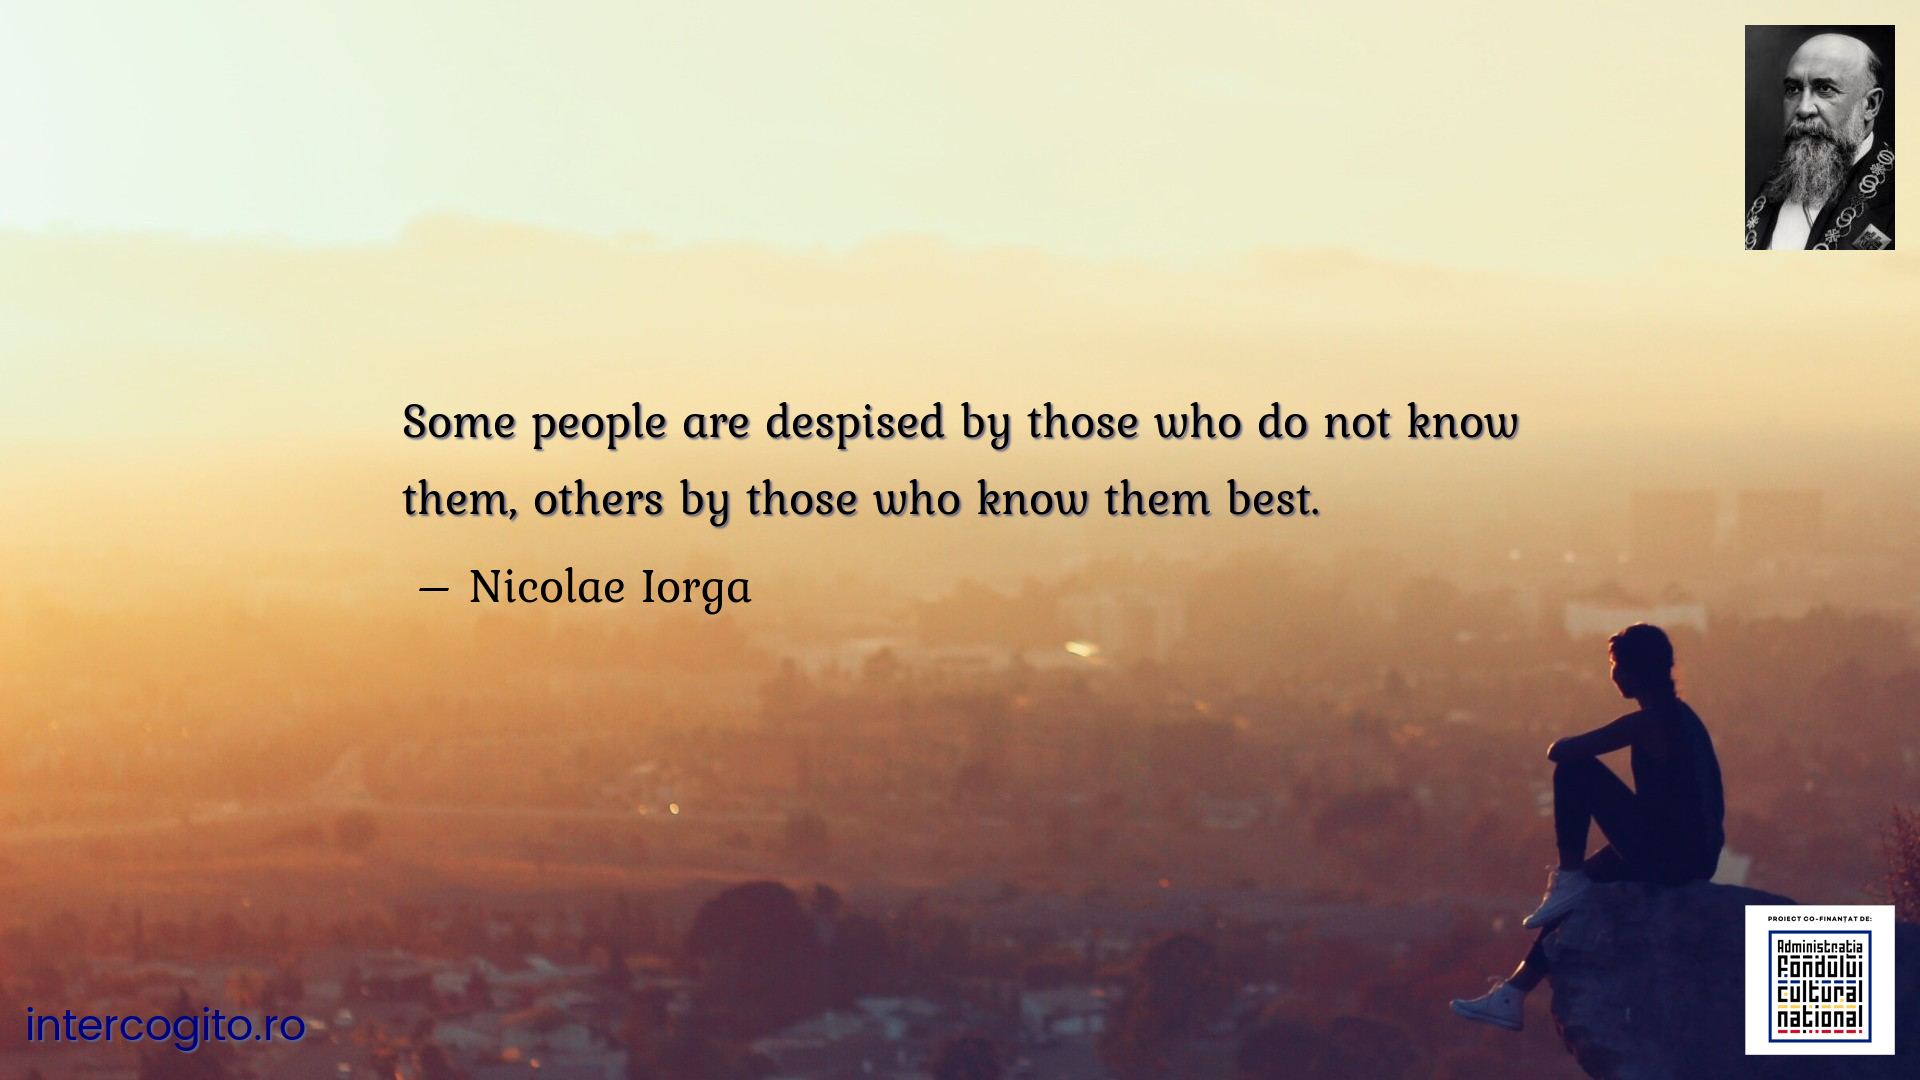 Some people are despised by those who do not know them, others by those who know them best.